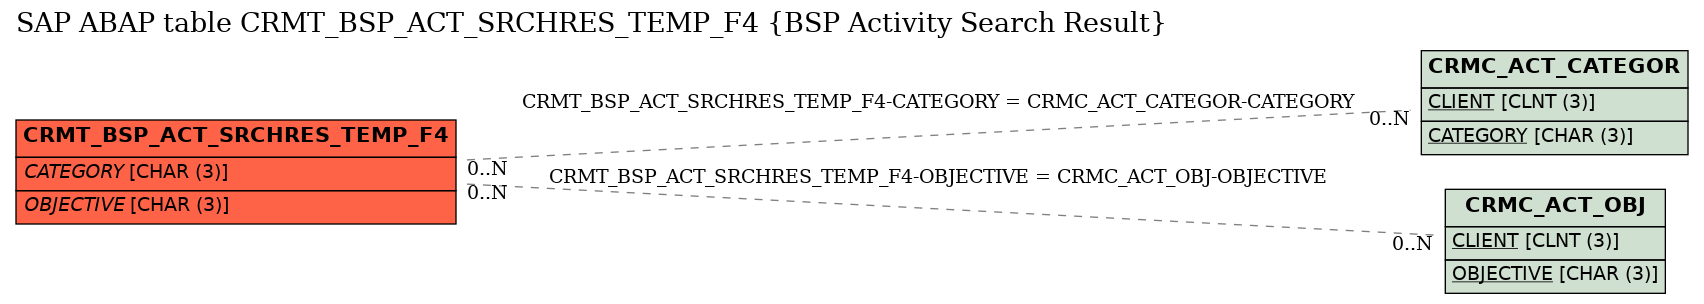 E-R Diagram for table CRMT_BSP_ACT_SRCHRES_TEMP_F4 (BSP Activity Search Result)